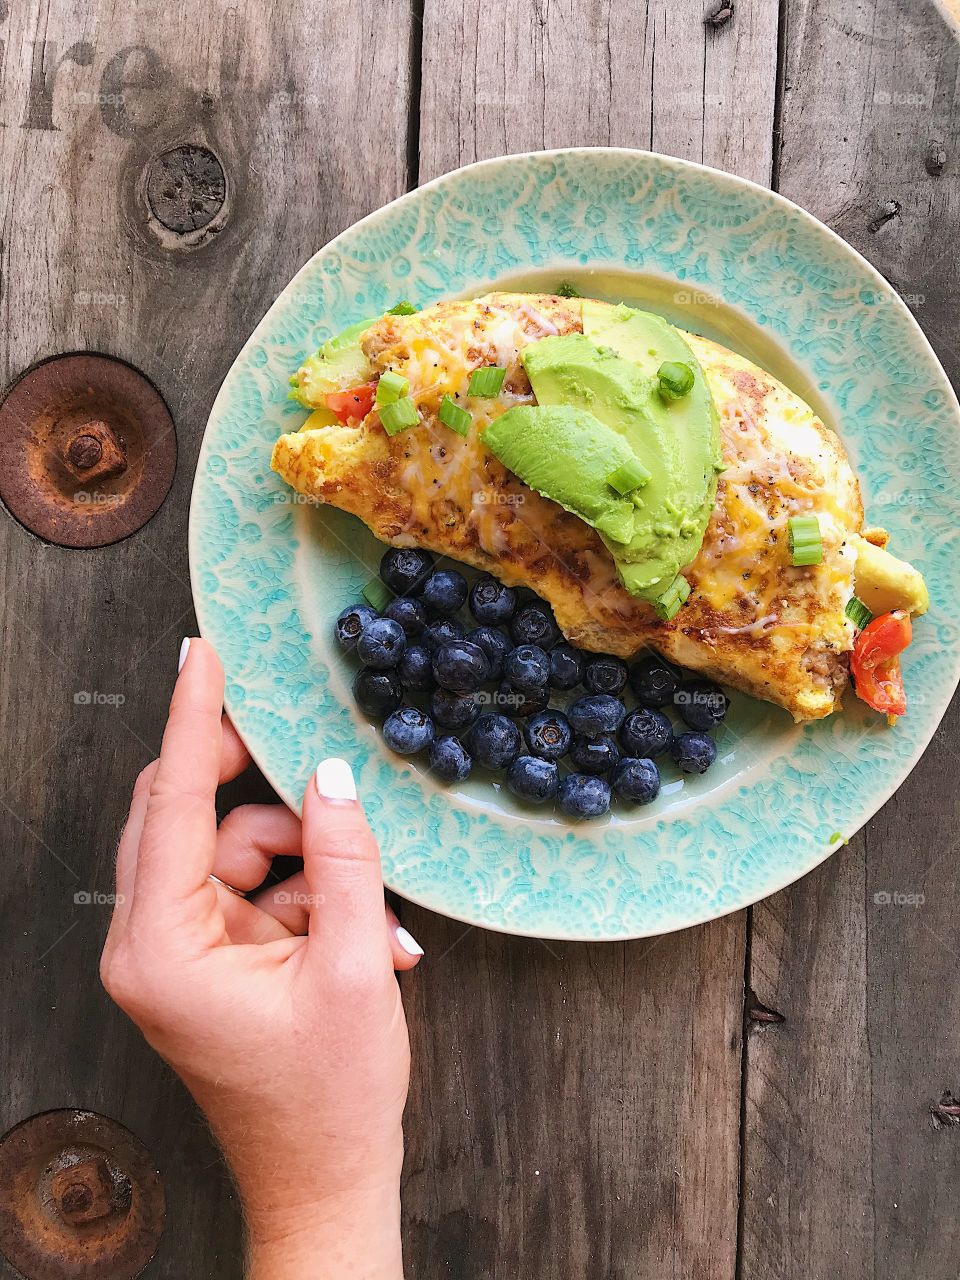 Fresh veggie omelette with a side of fresh blueberries make for the perfect morning meal!